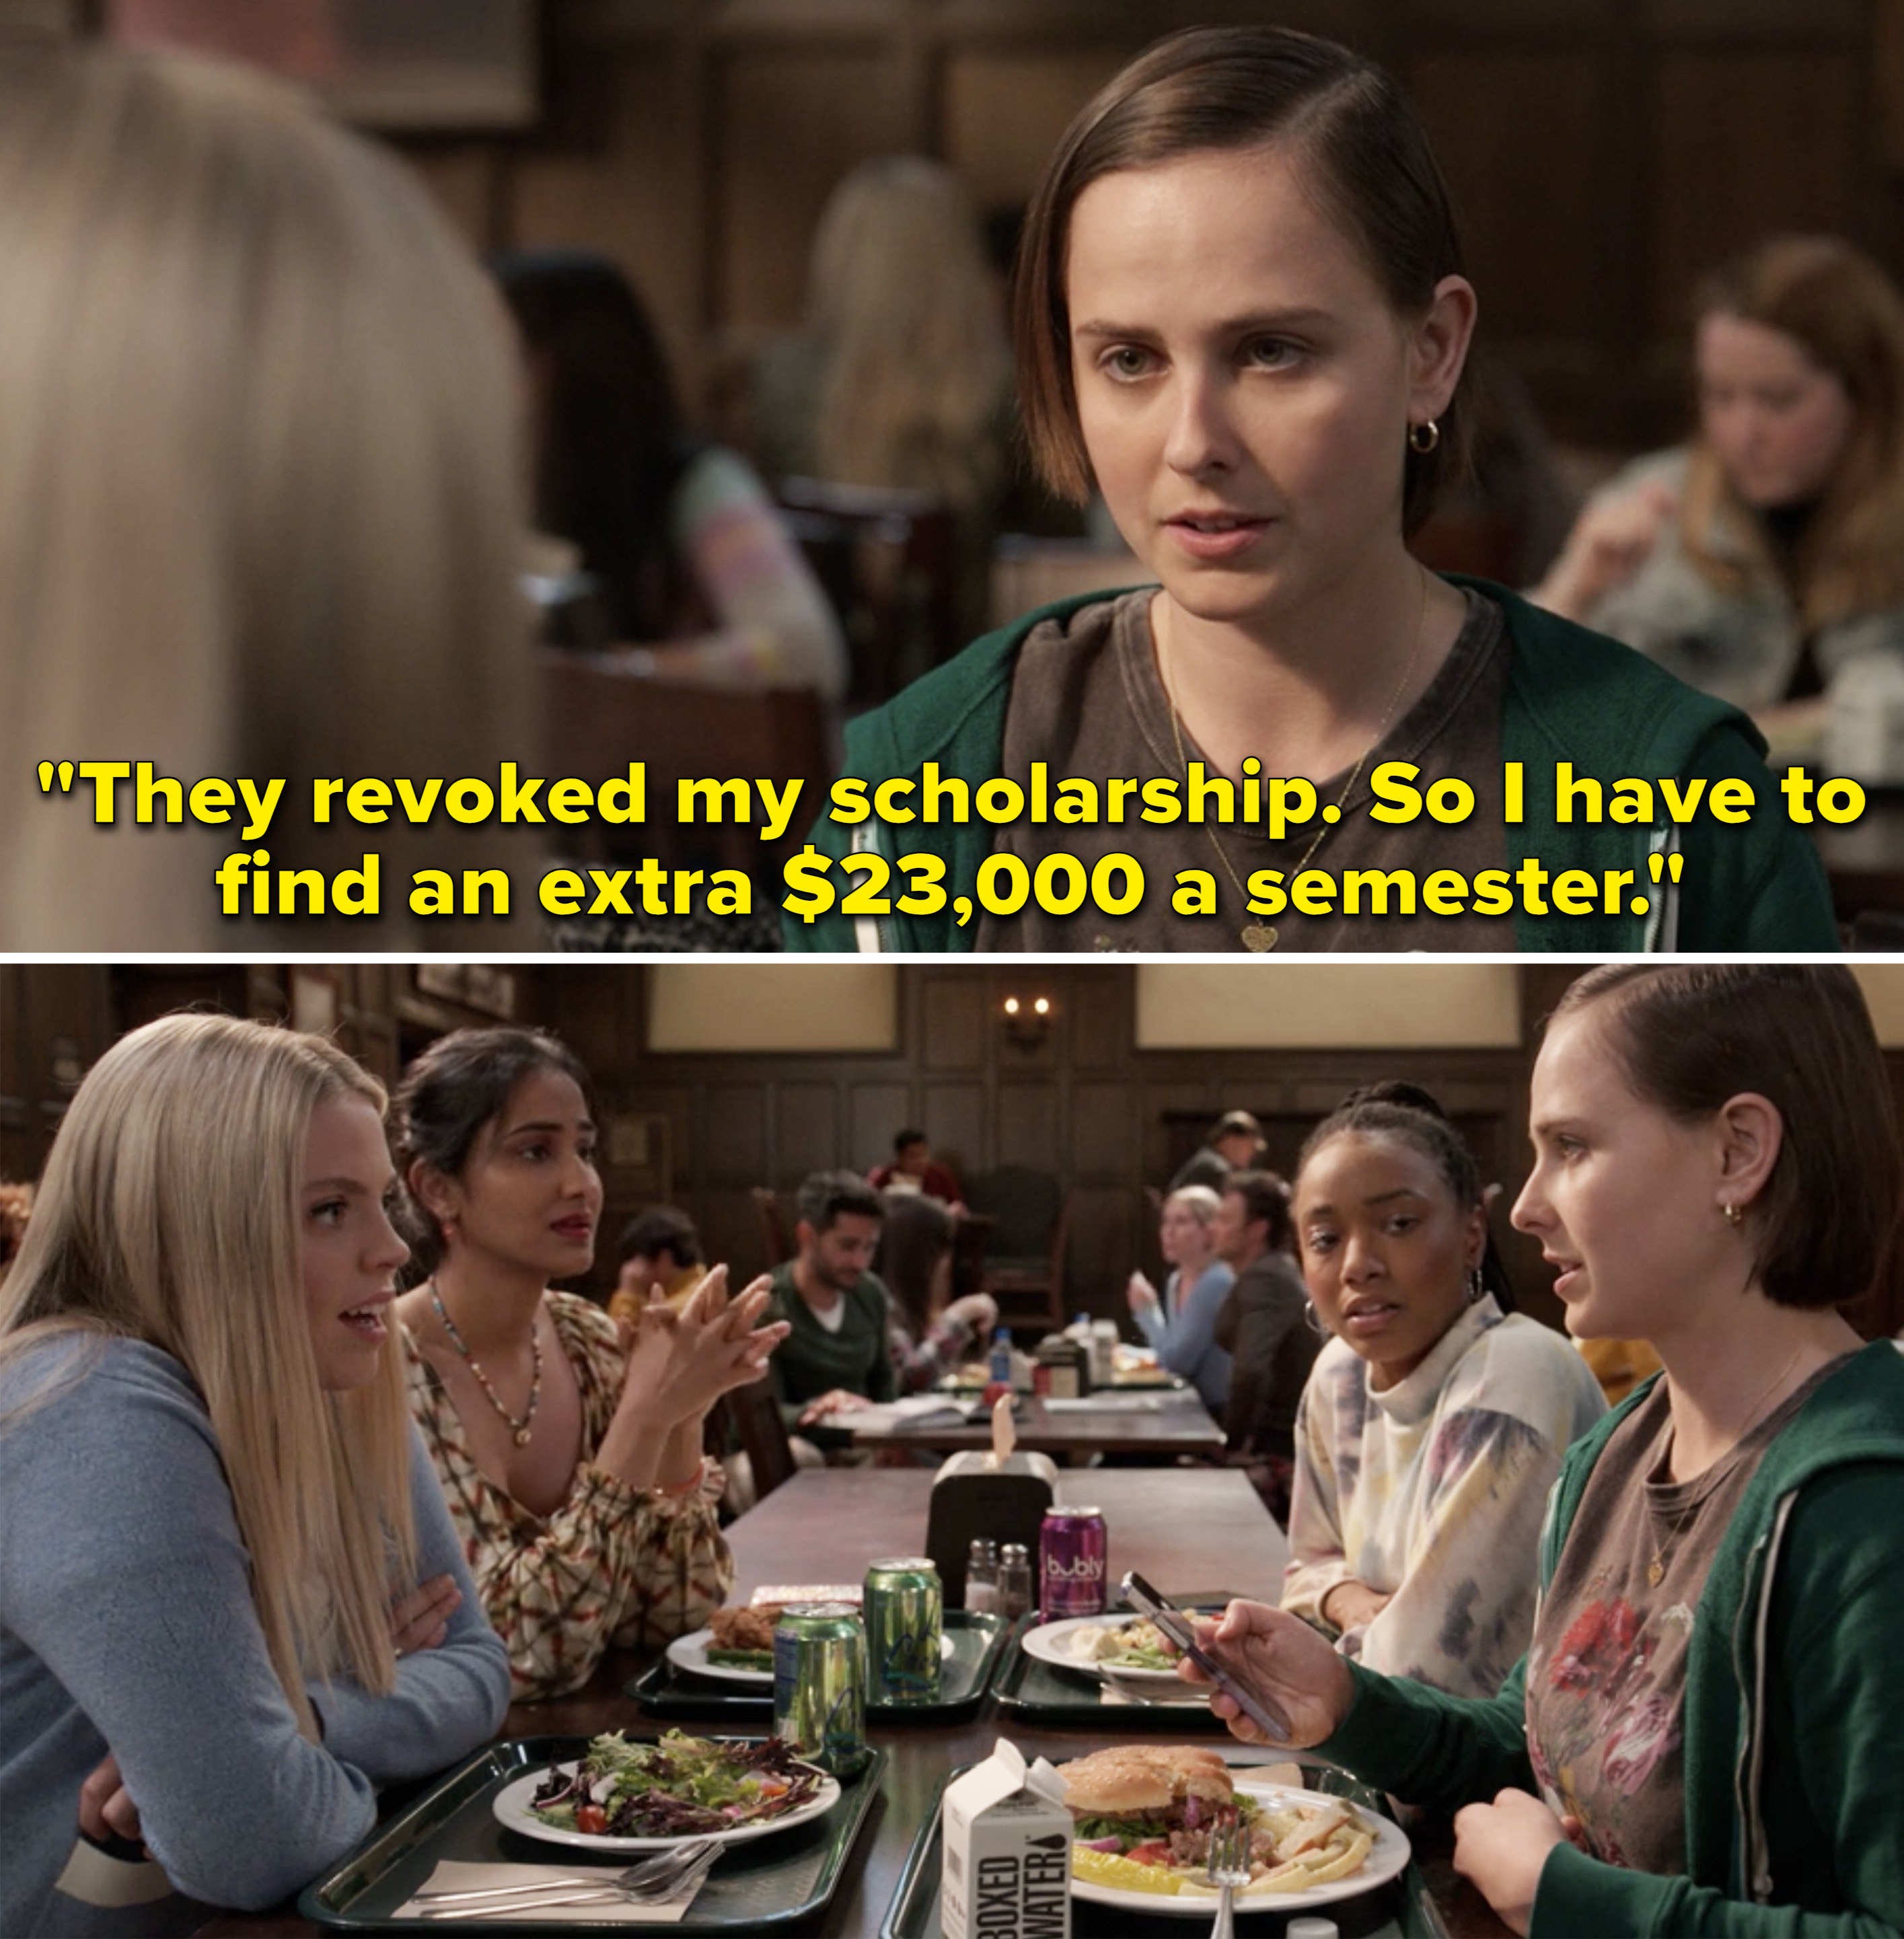 Kimberly saying &quot;They revoked my scholarship. So I have to find an extra $23,000 a semester&quot;